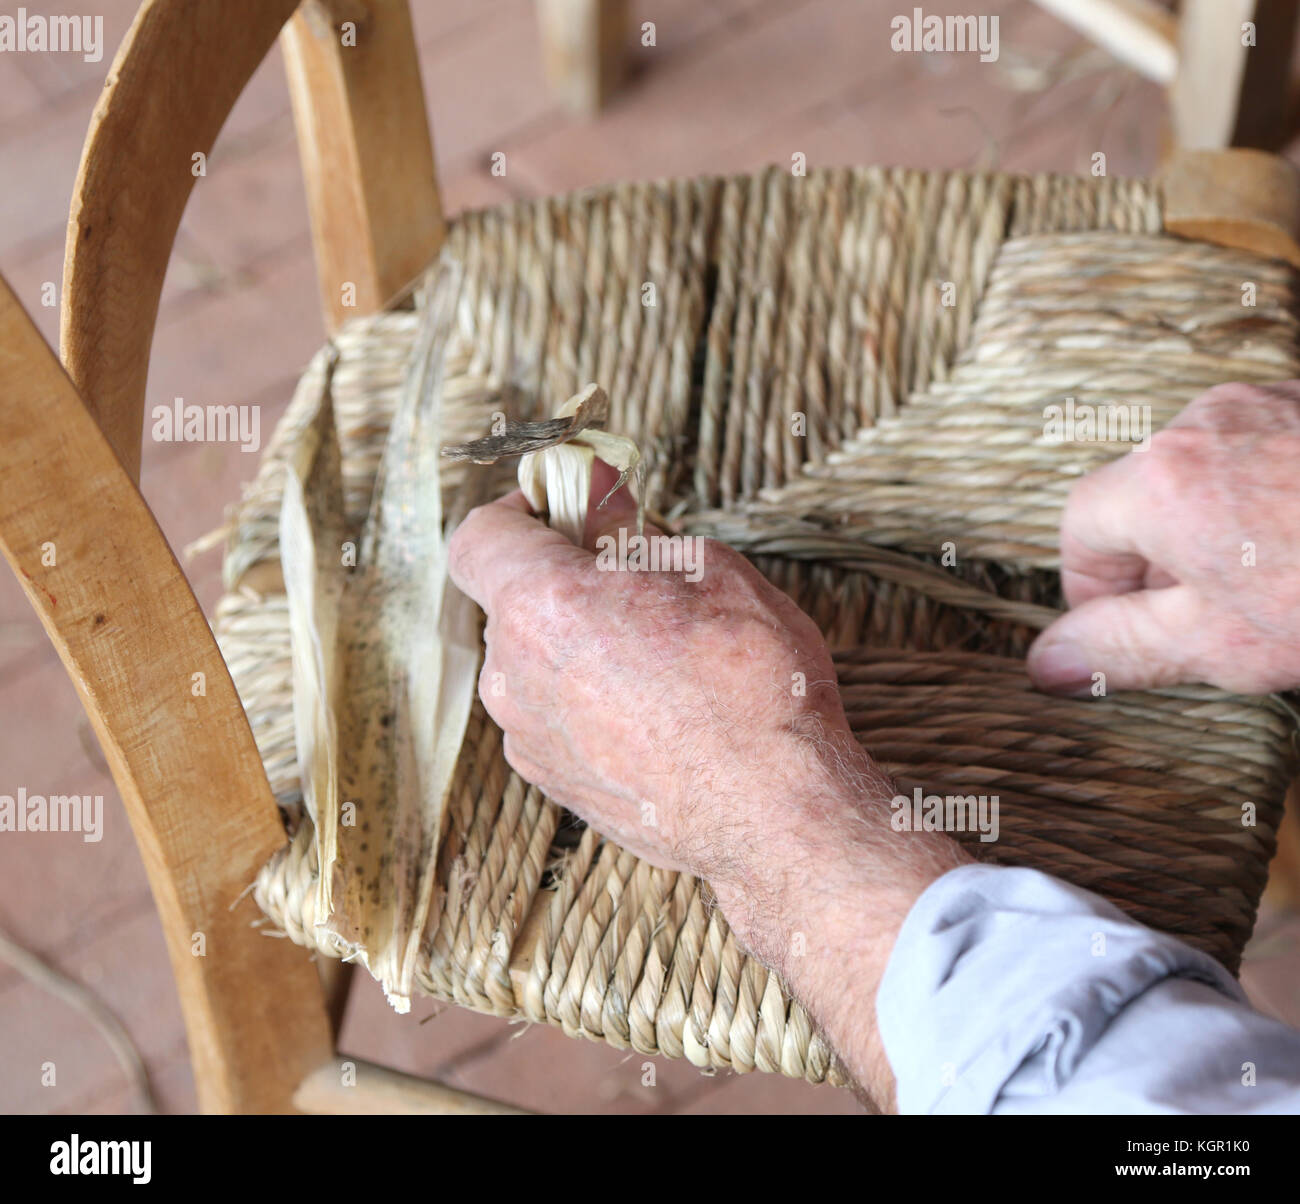 Hand Of An Expert Stuffing Chair At Work Stock Photo 165234020